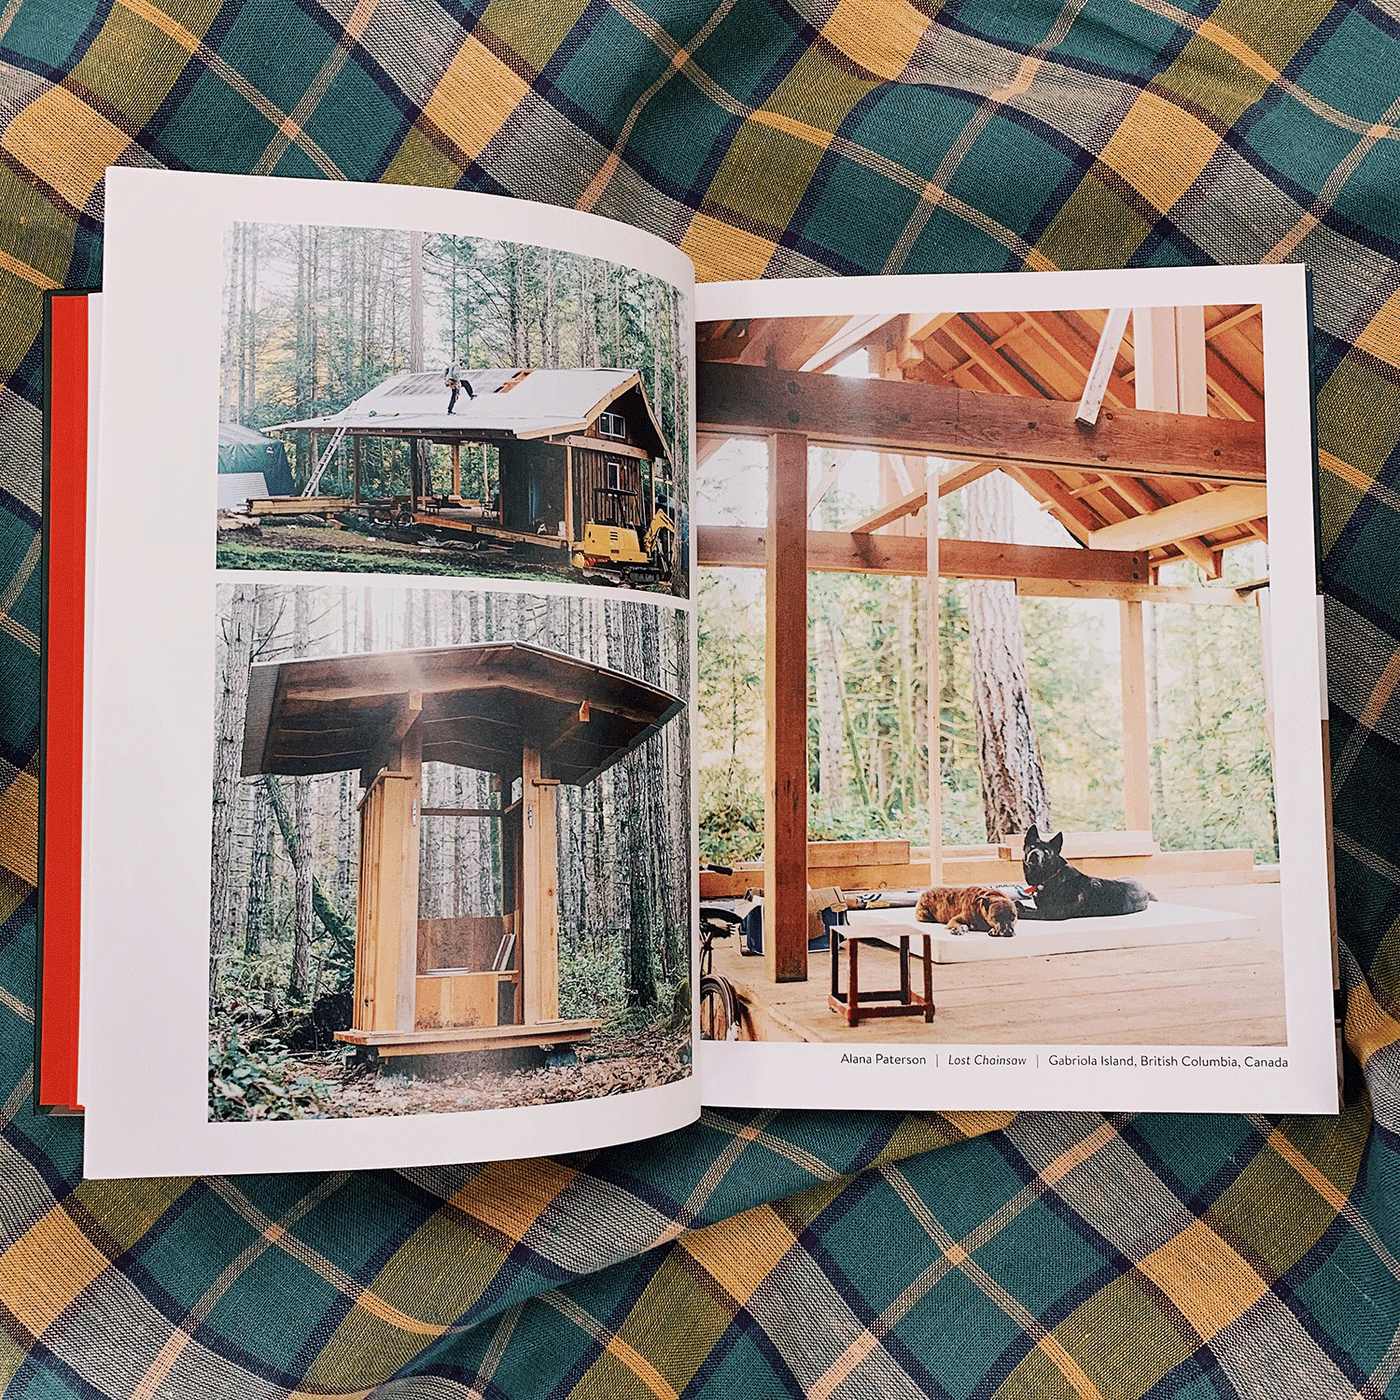 Off Grid Life by Foster Huntington